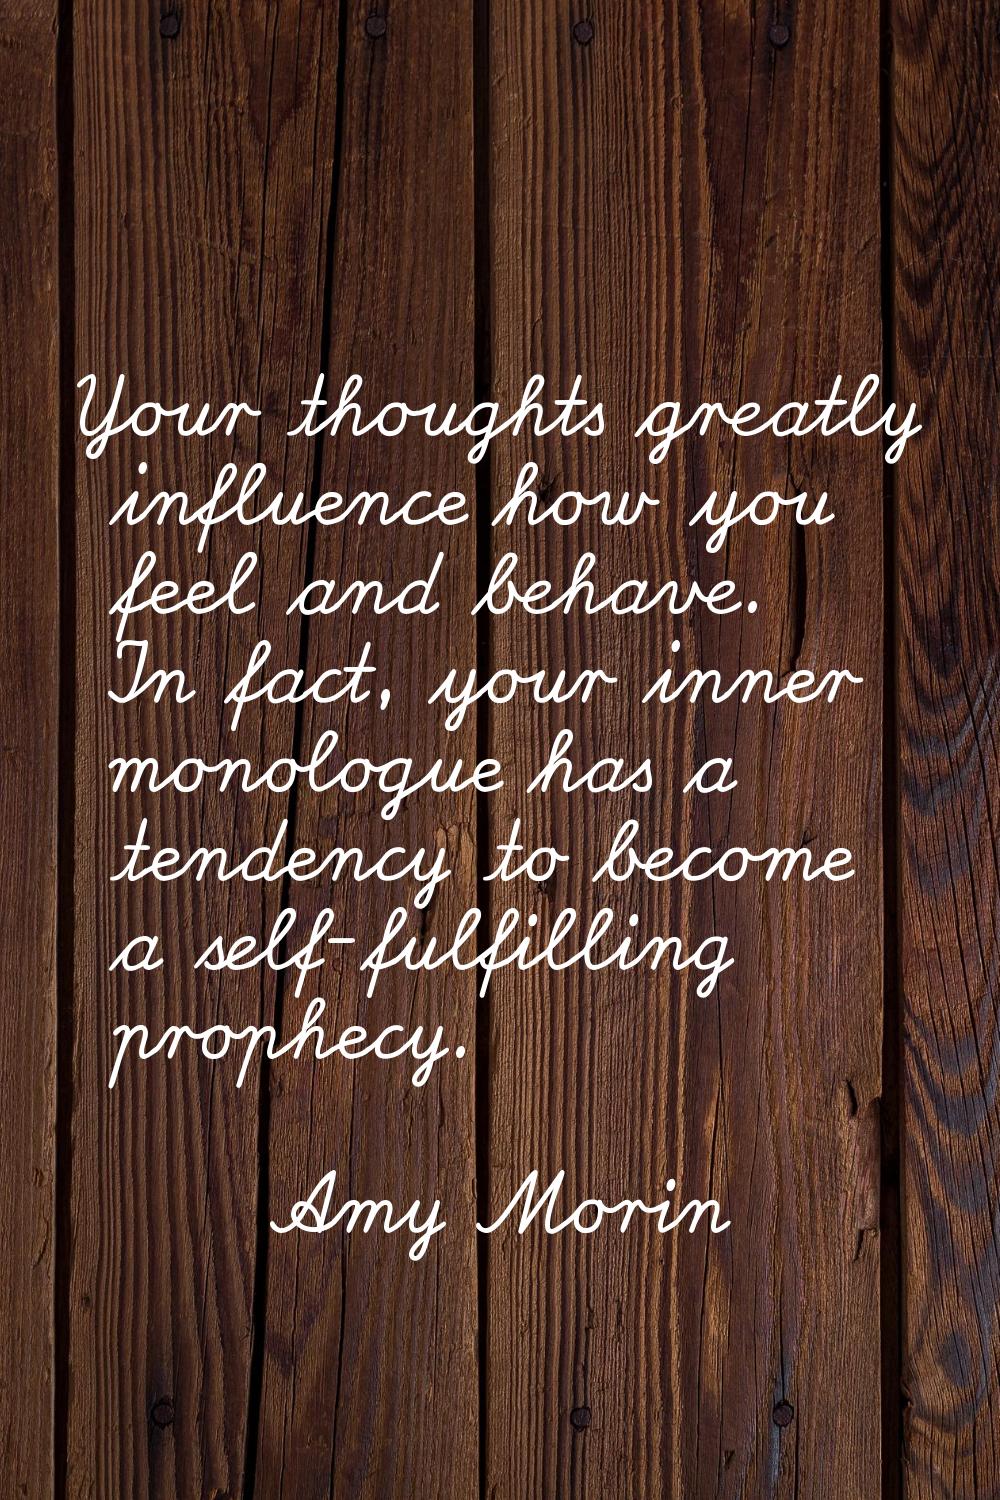 Your thoughts greatly influence how you feel and behave. In fact, your inner monologue has a tenden